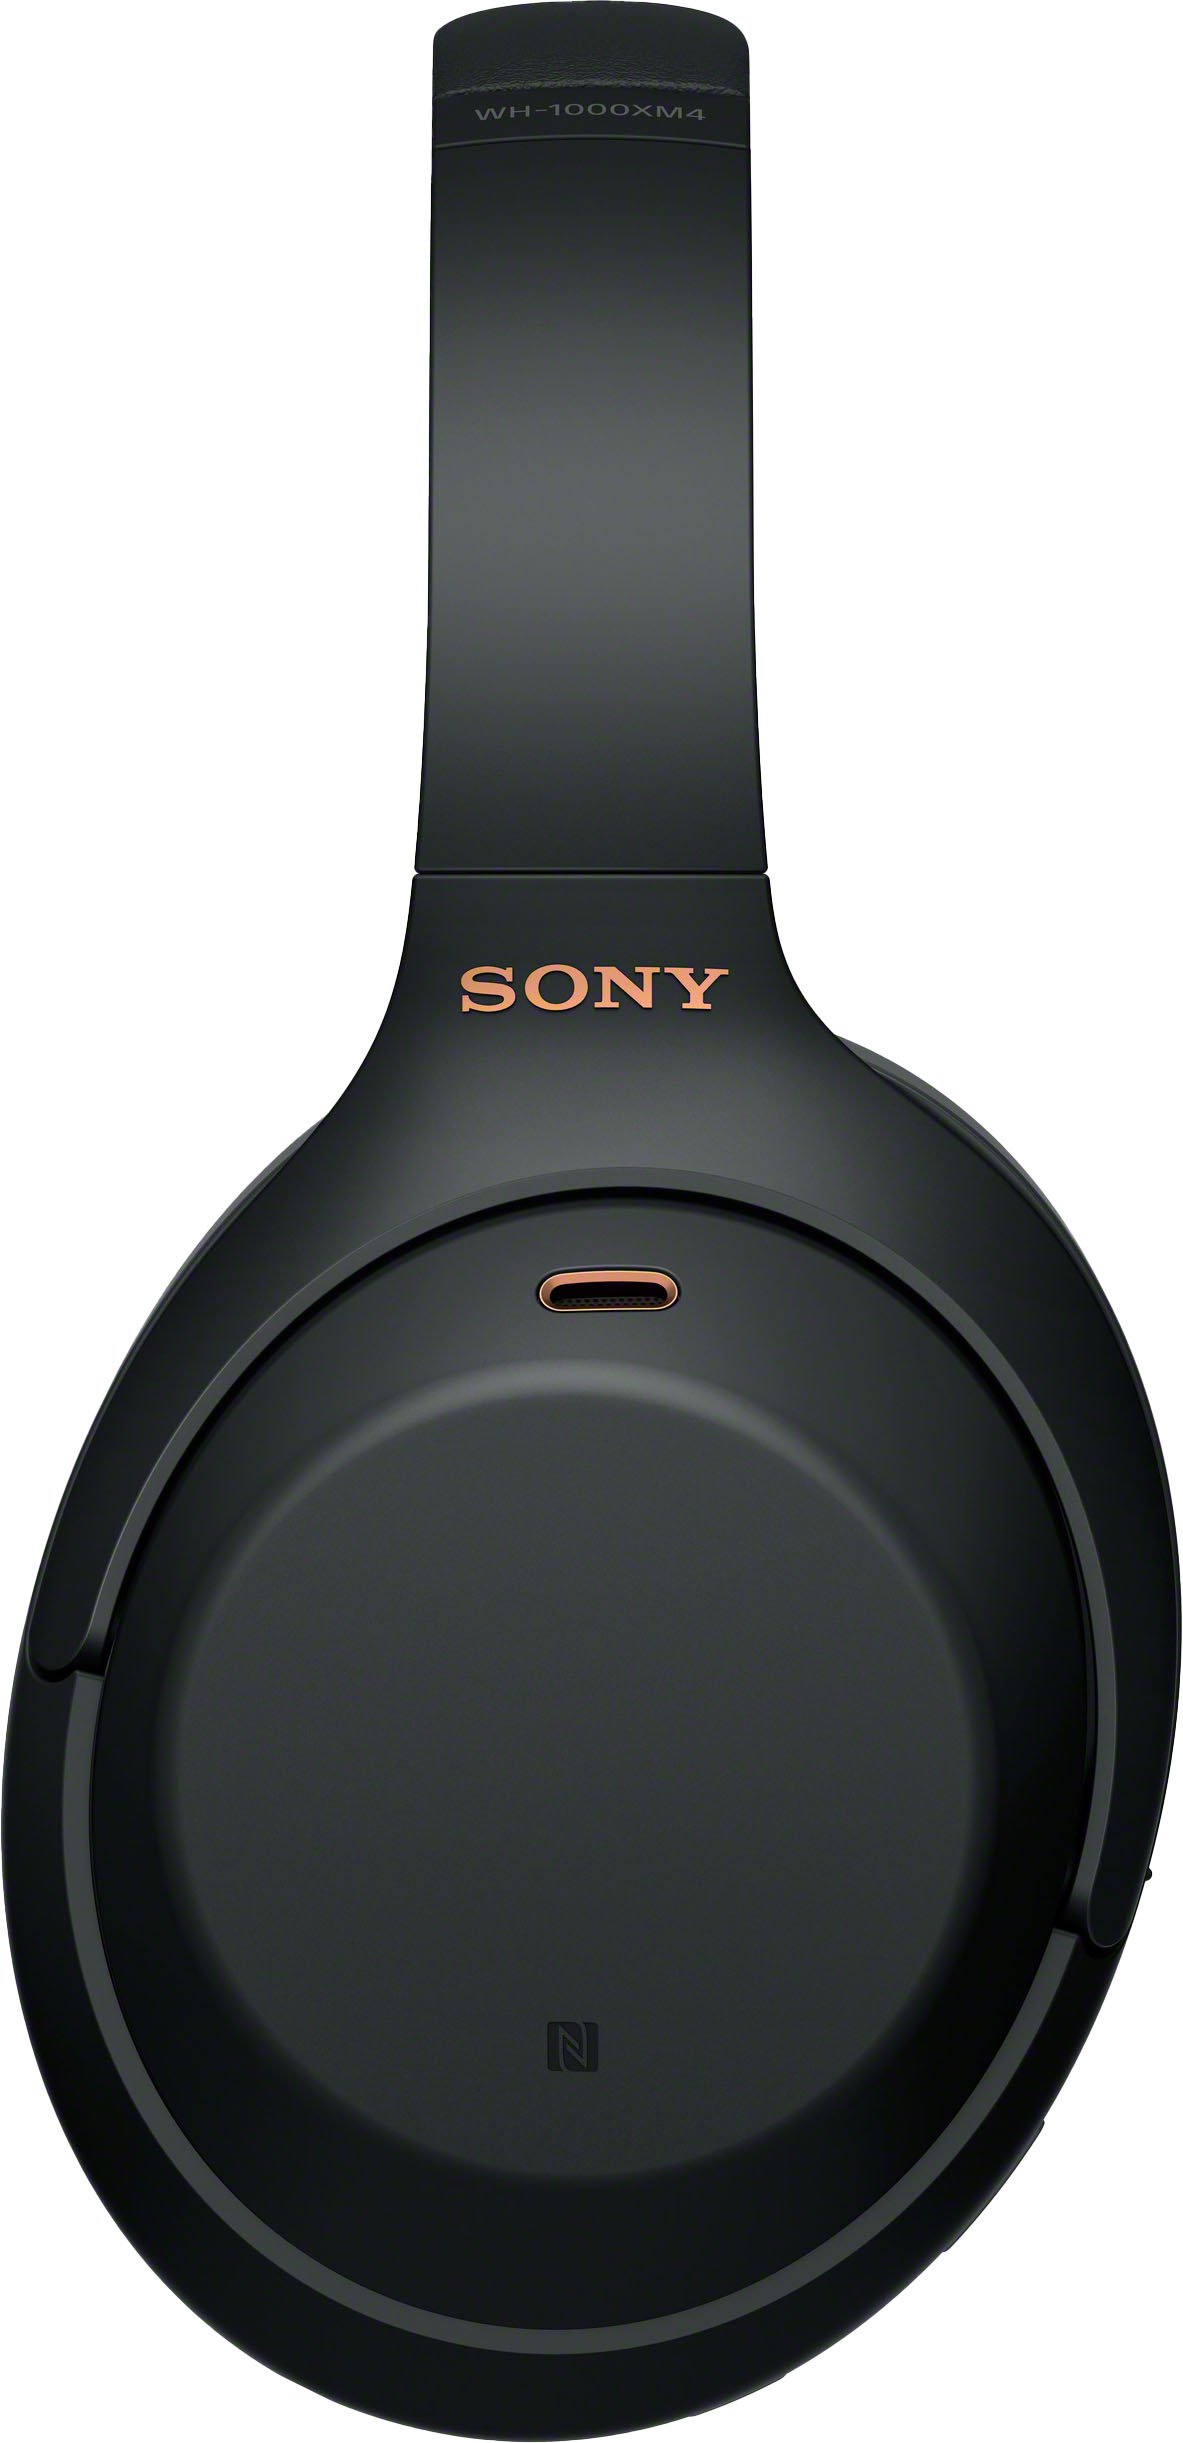 Sony WH-1000XM4 Wireless Noise-Cancelling Over-the-Ear Headphones Black  WH1000XM4/B - Best Buy